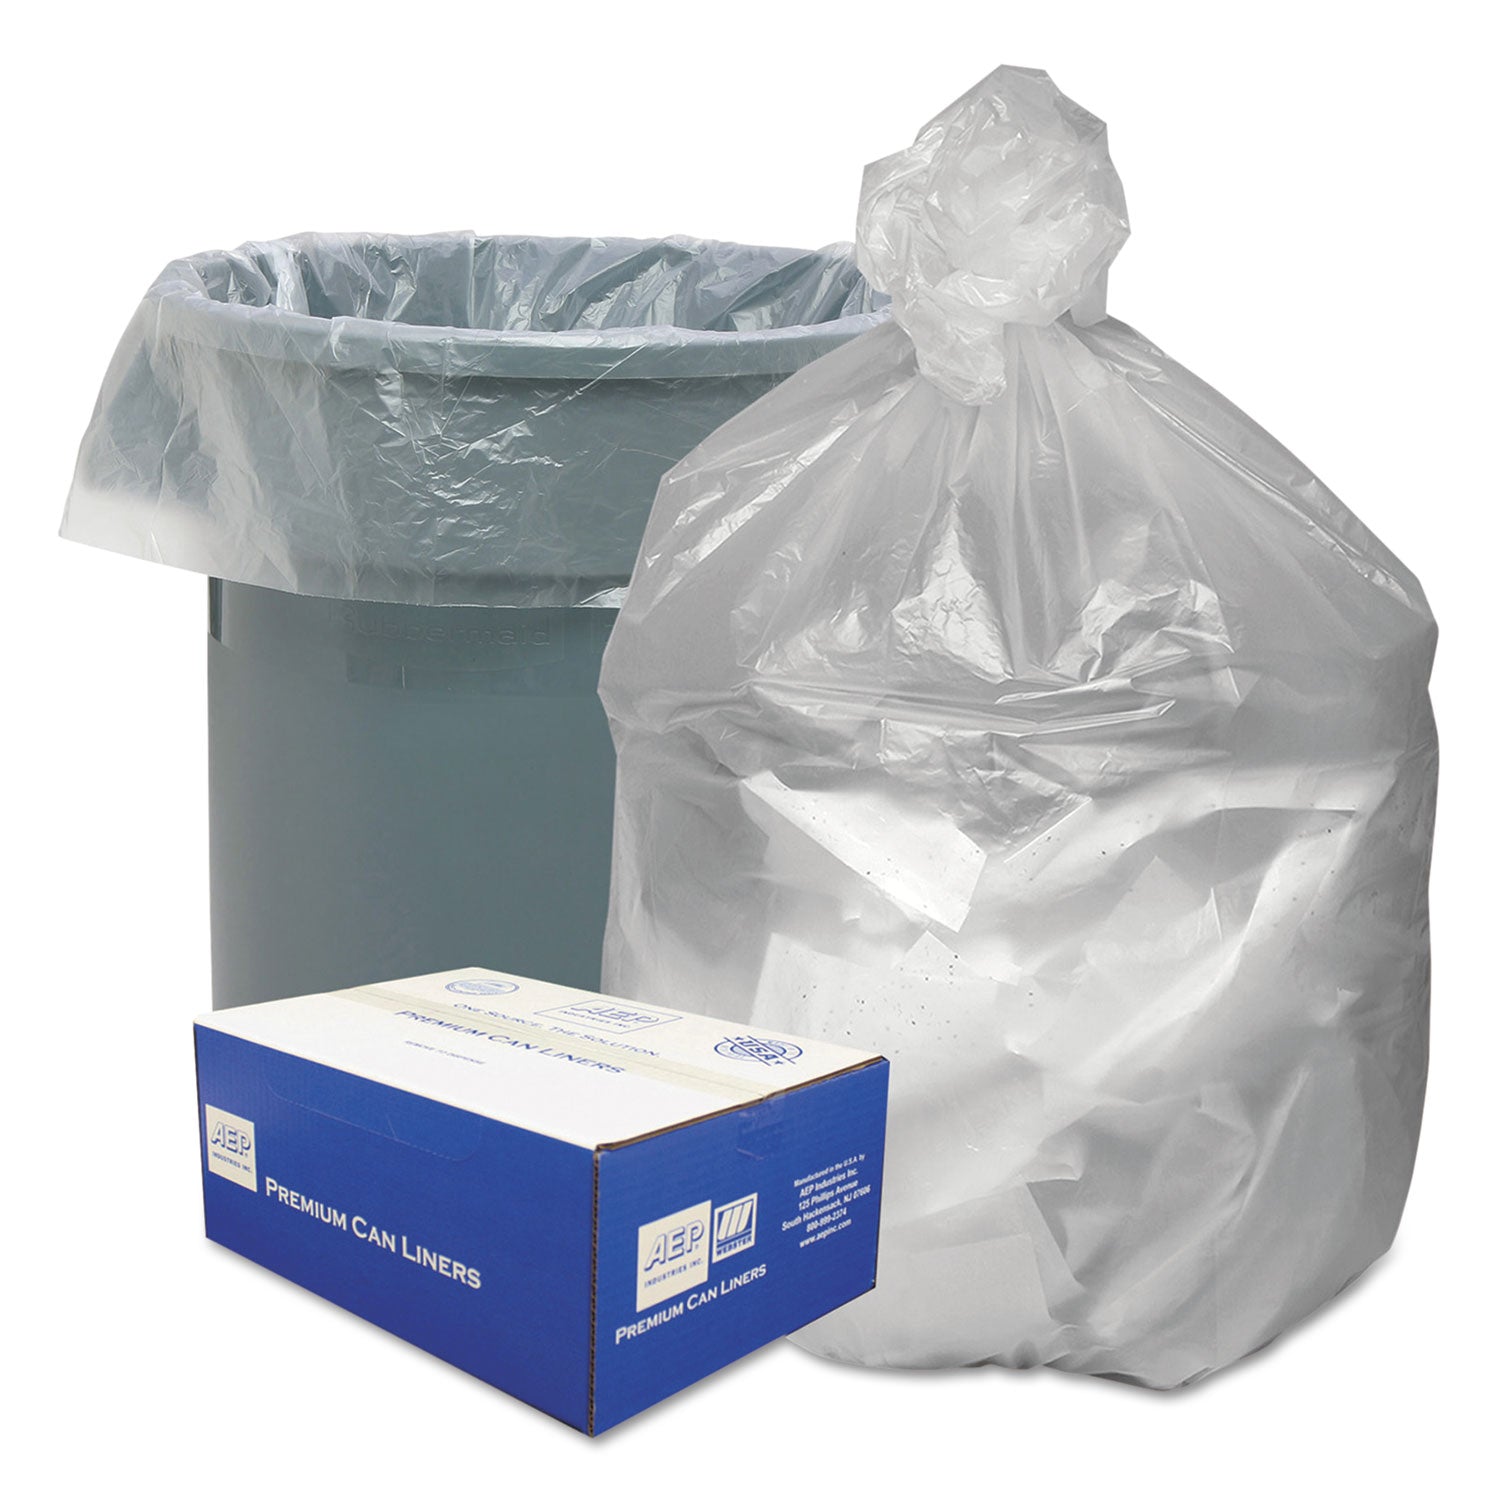 waste-can-liners-60-gal-12-mic-38-x-58-natural-20-bags-roll-10-rolls-carton_wbignt3860 - 1